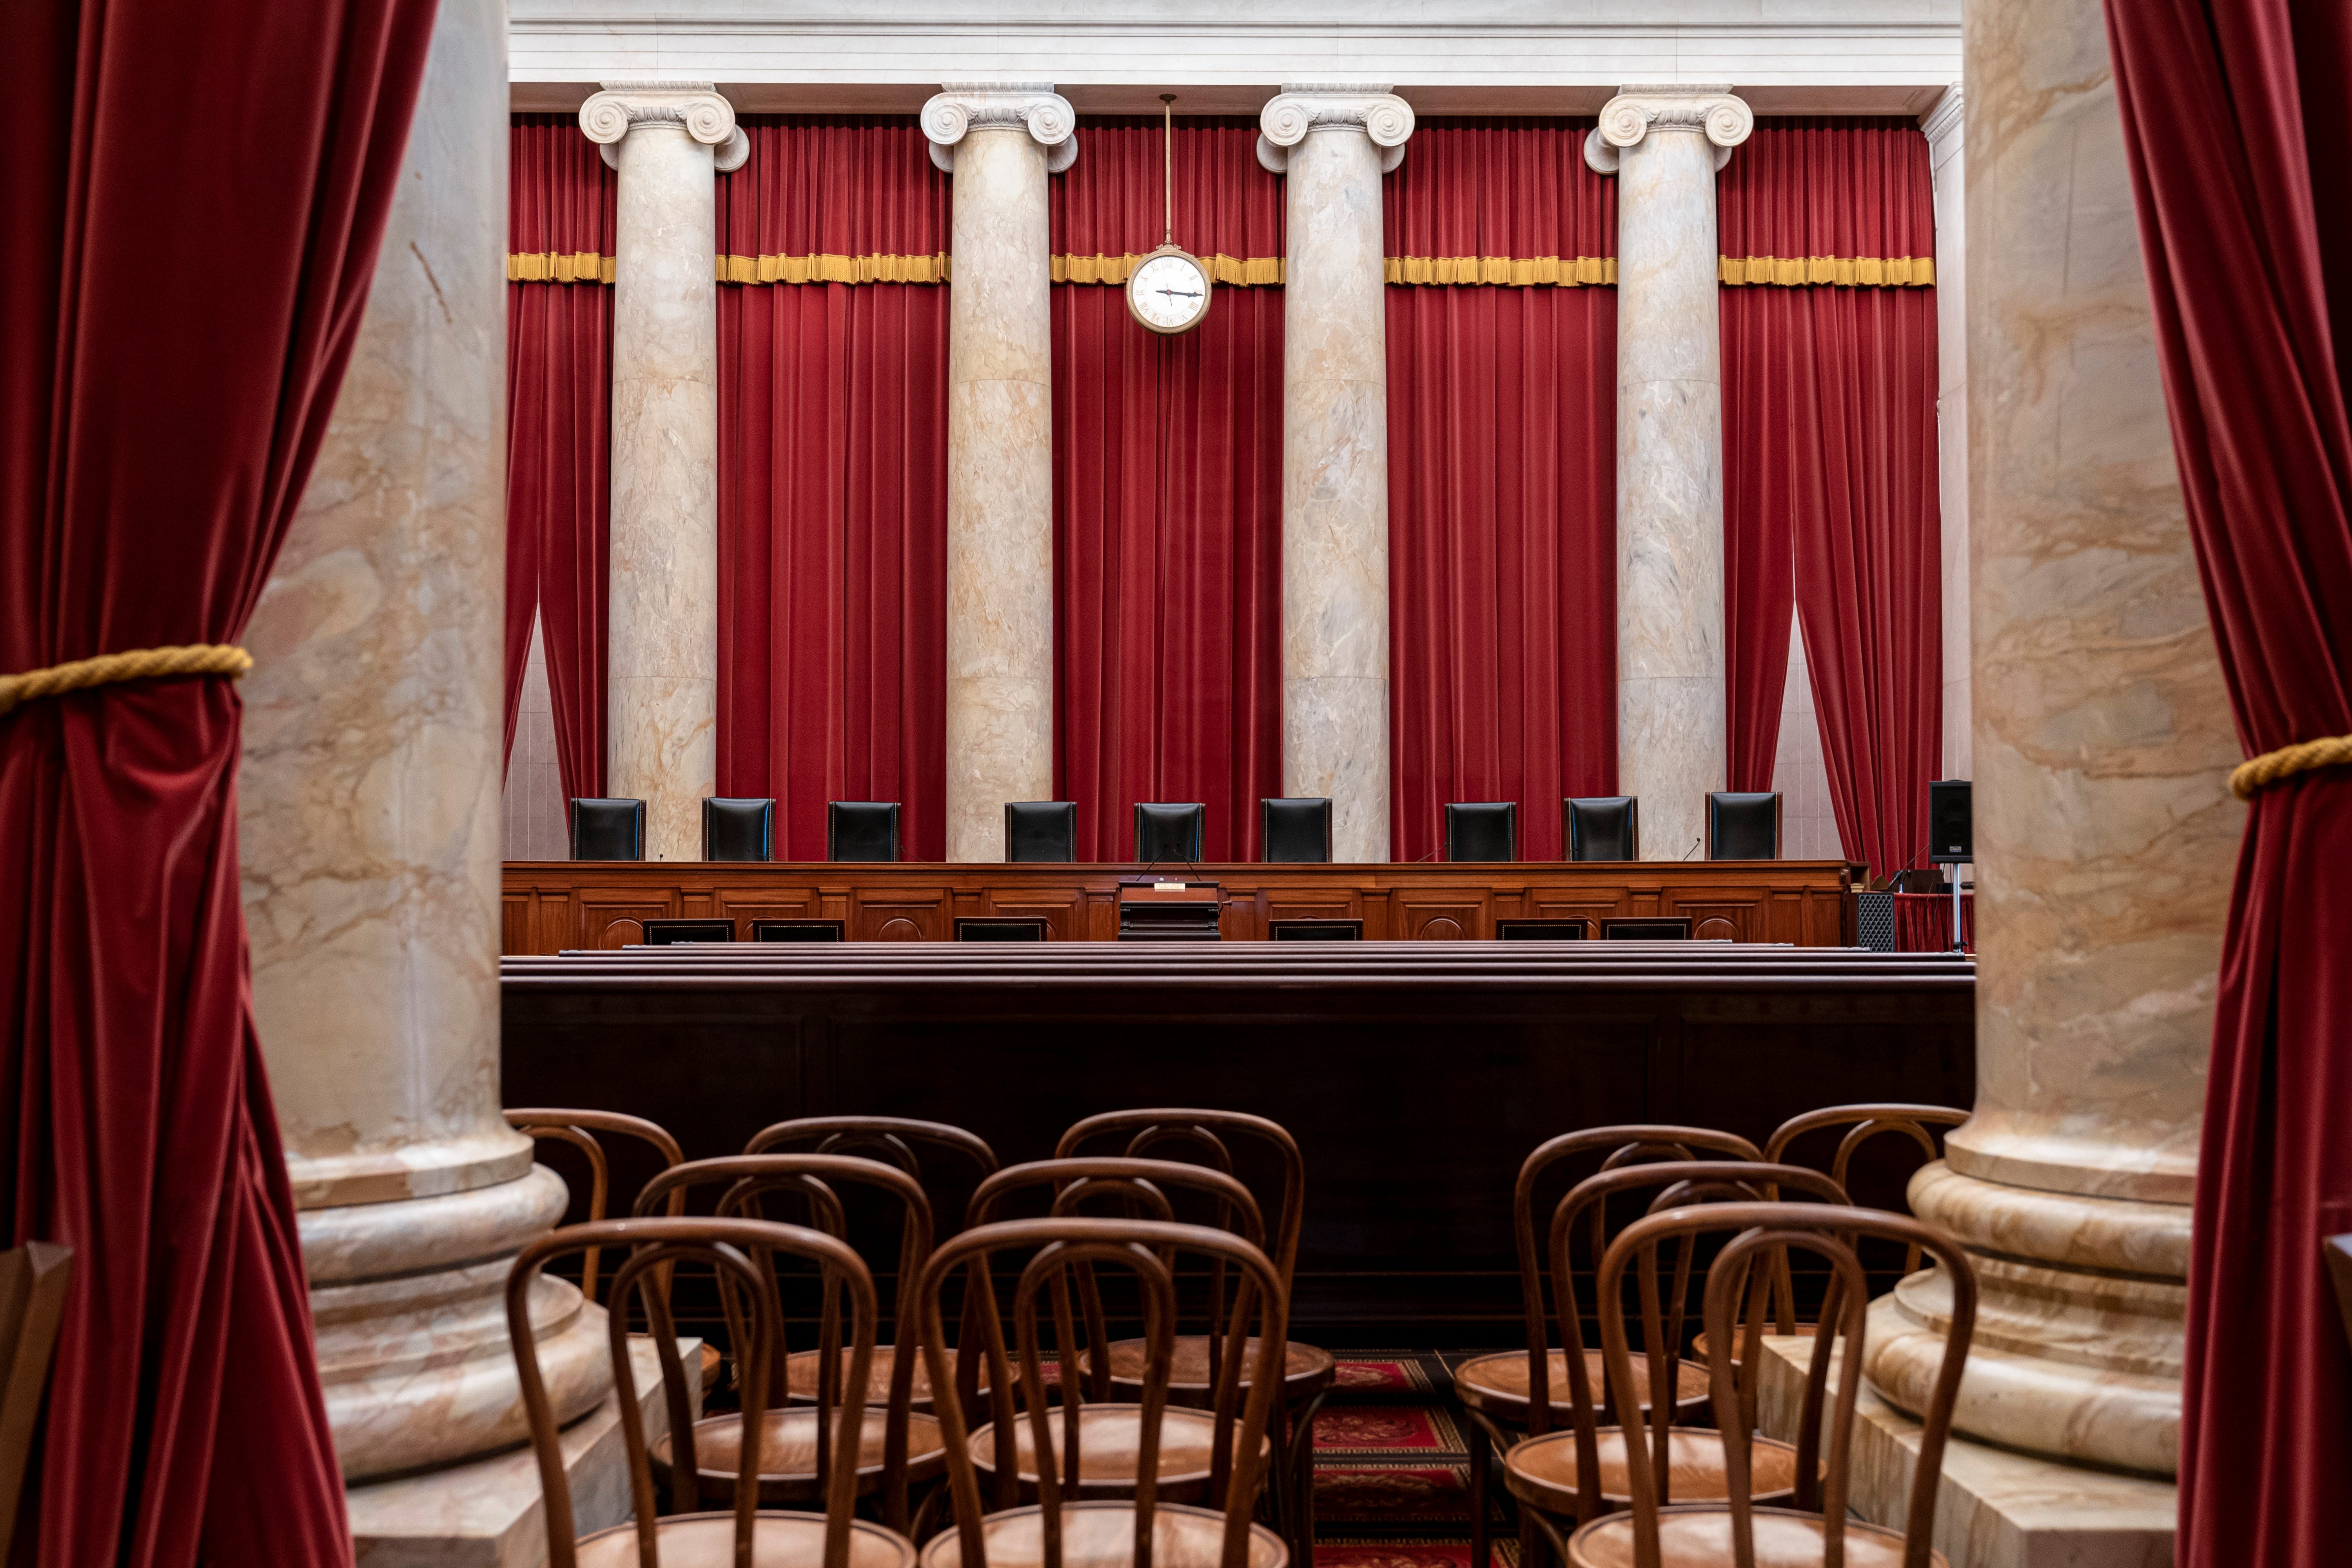 The empty courtroom is seen at the U.S. Supreme Court in Washington